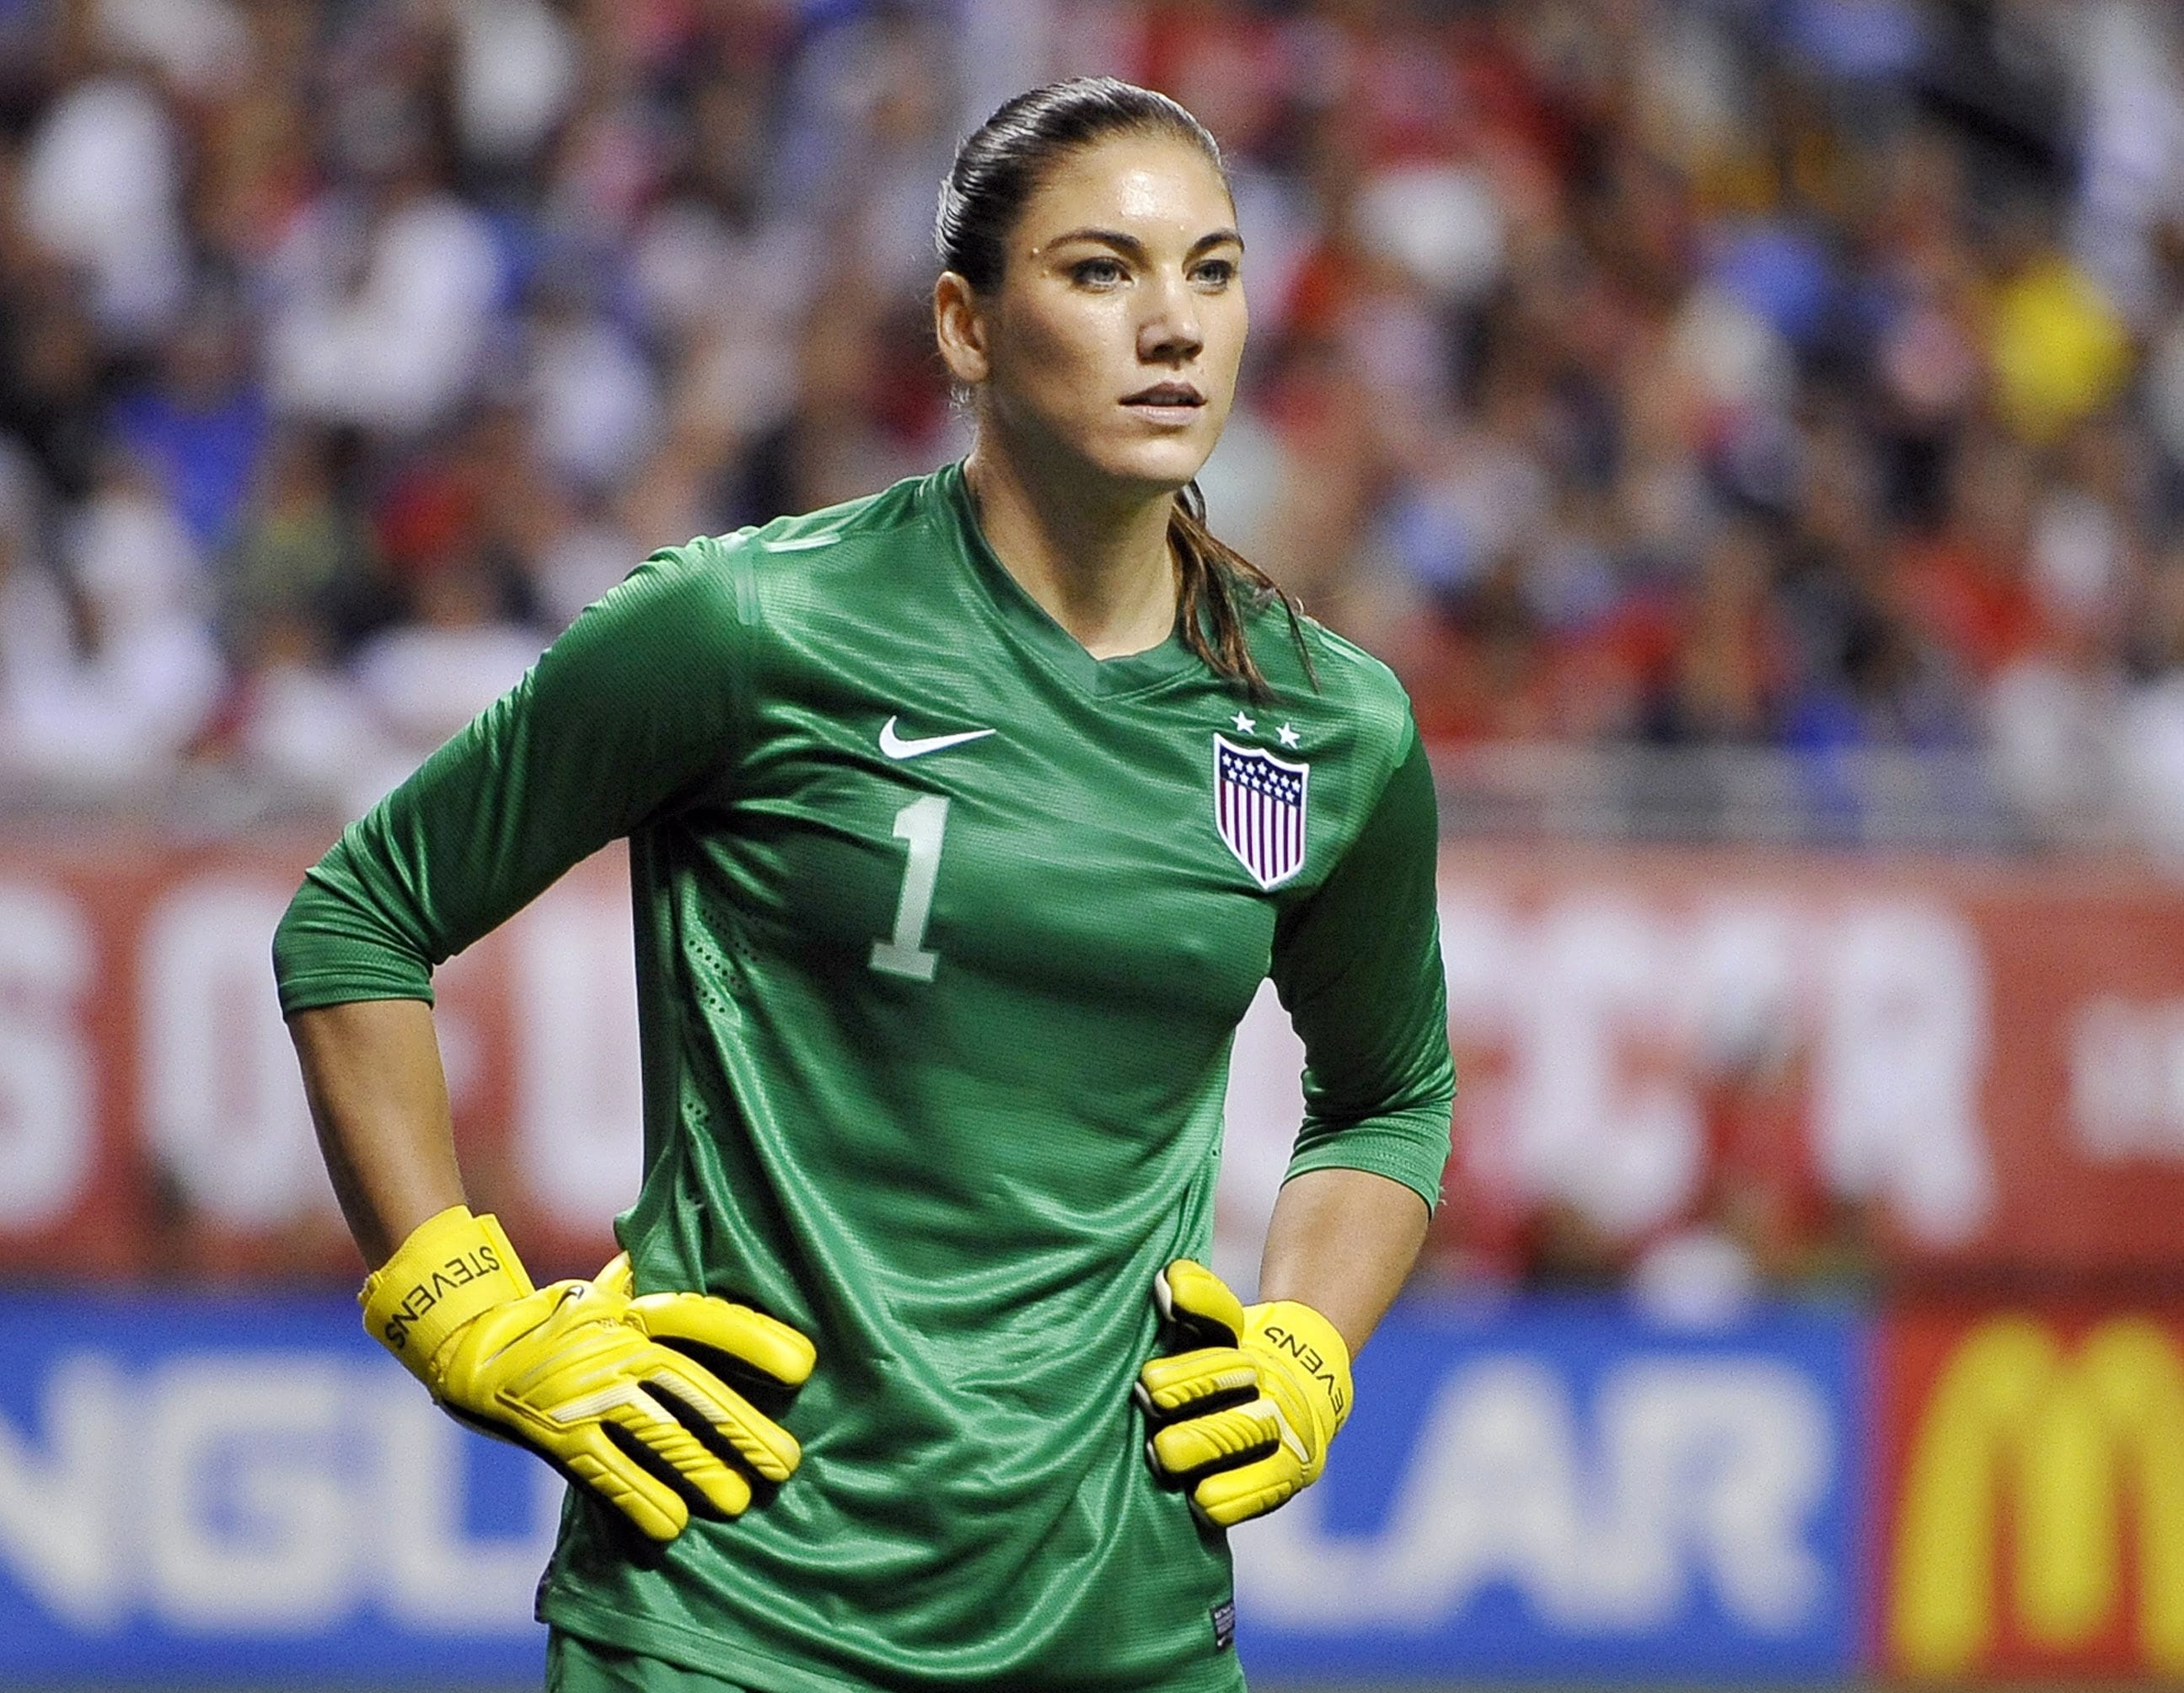 United States goalkeeper Hope Solo pauses on the field during the second half of an international friendly womenu2019s soccer match against Australia in San Antonio.